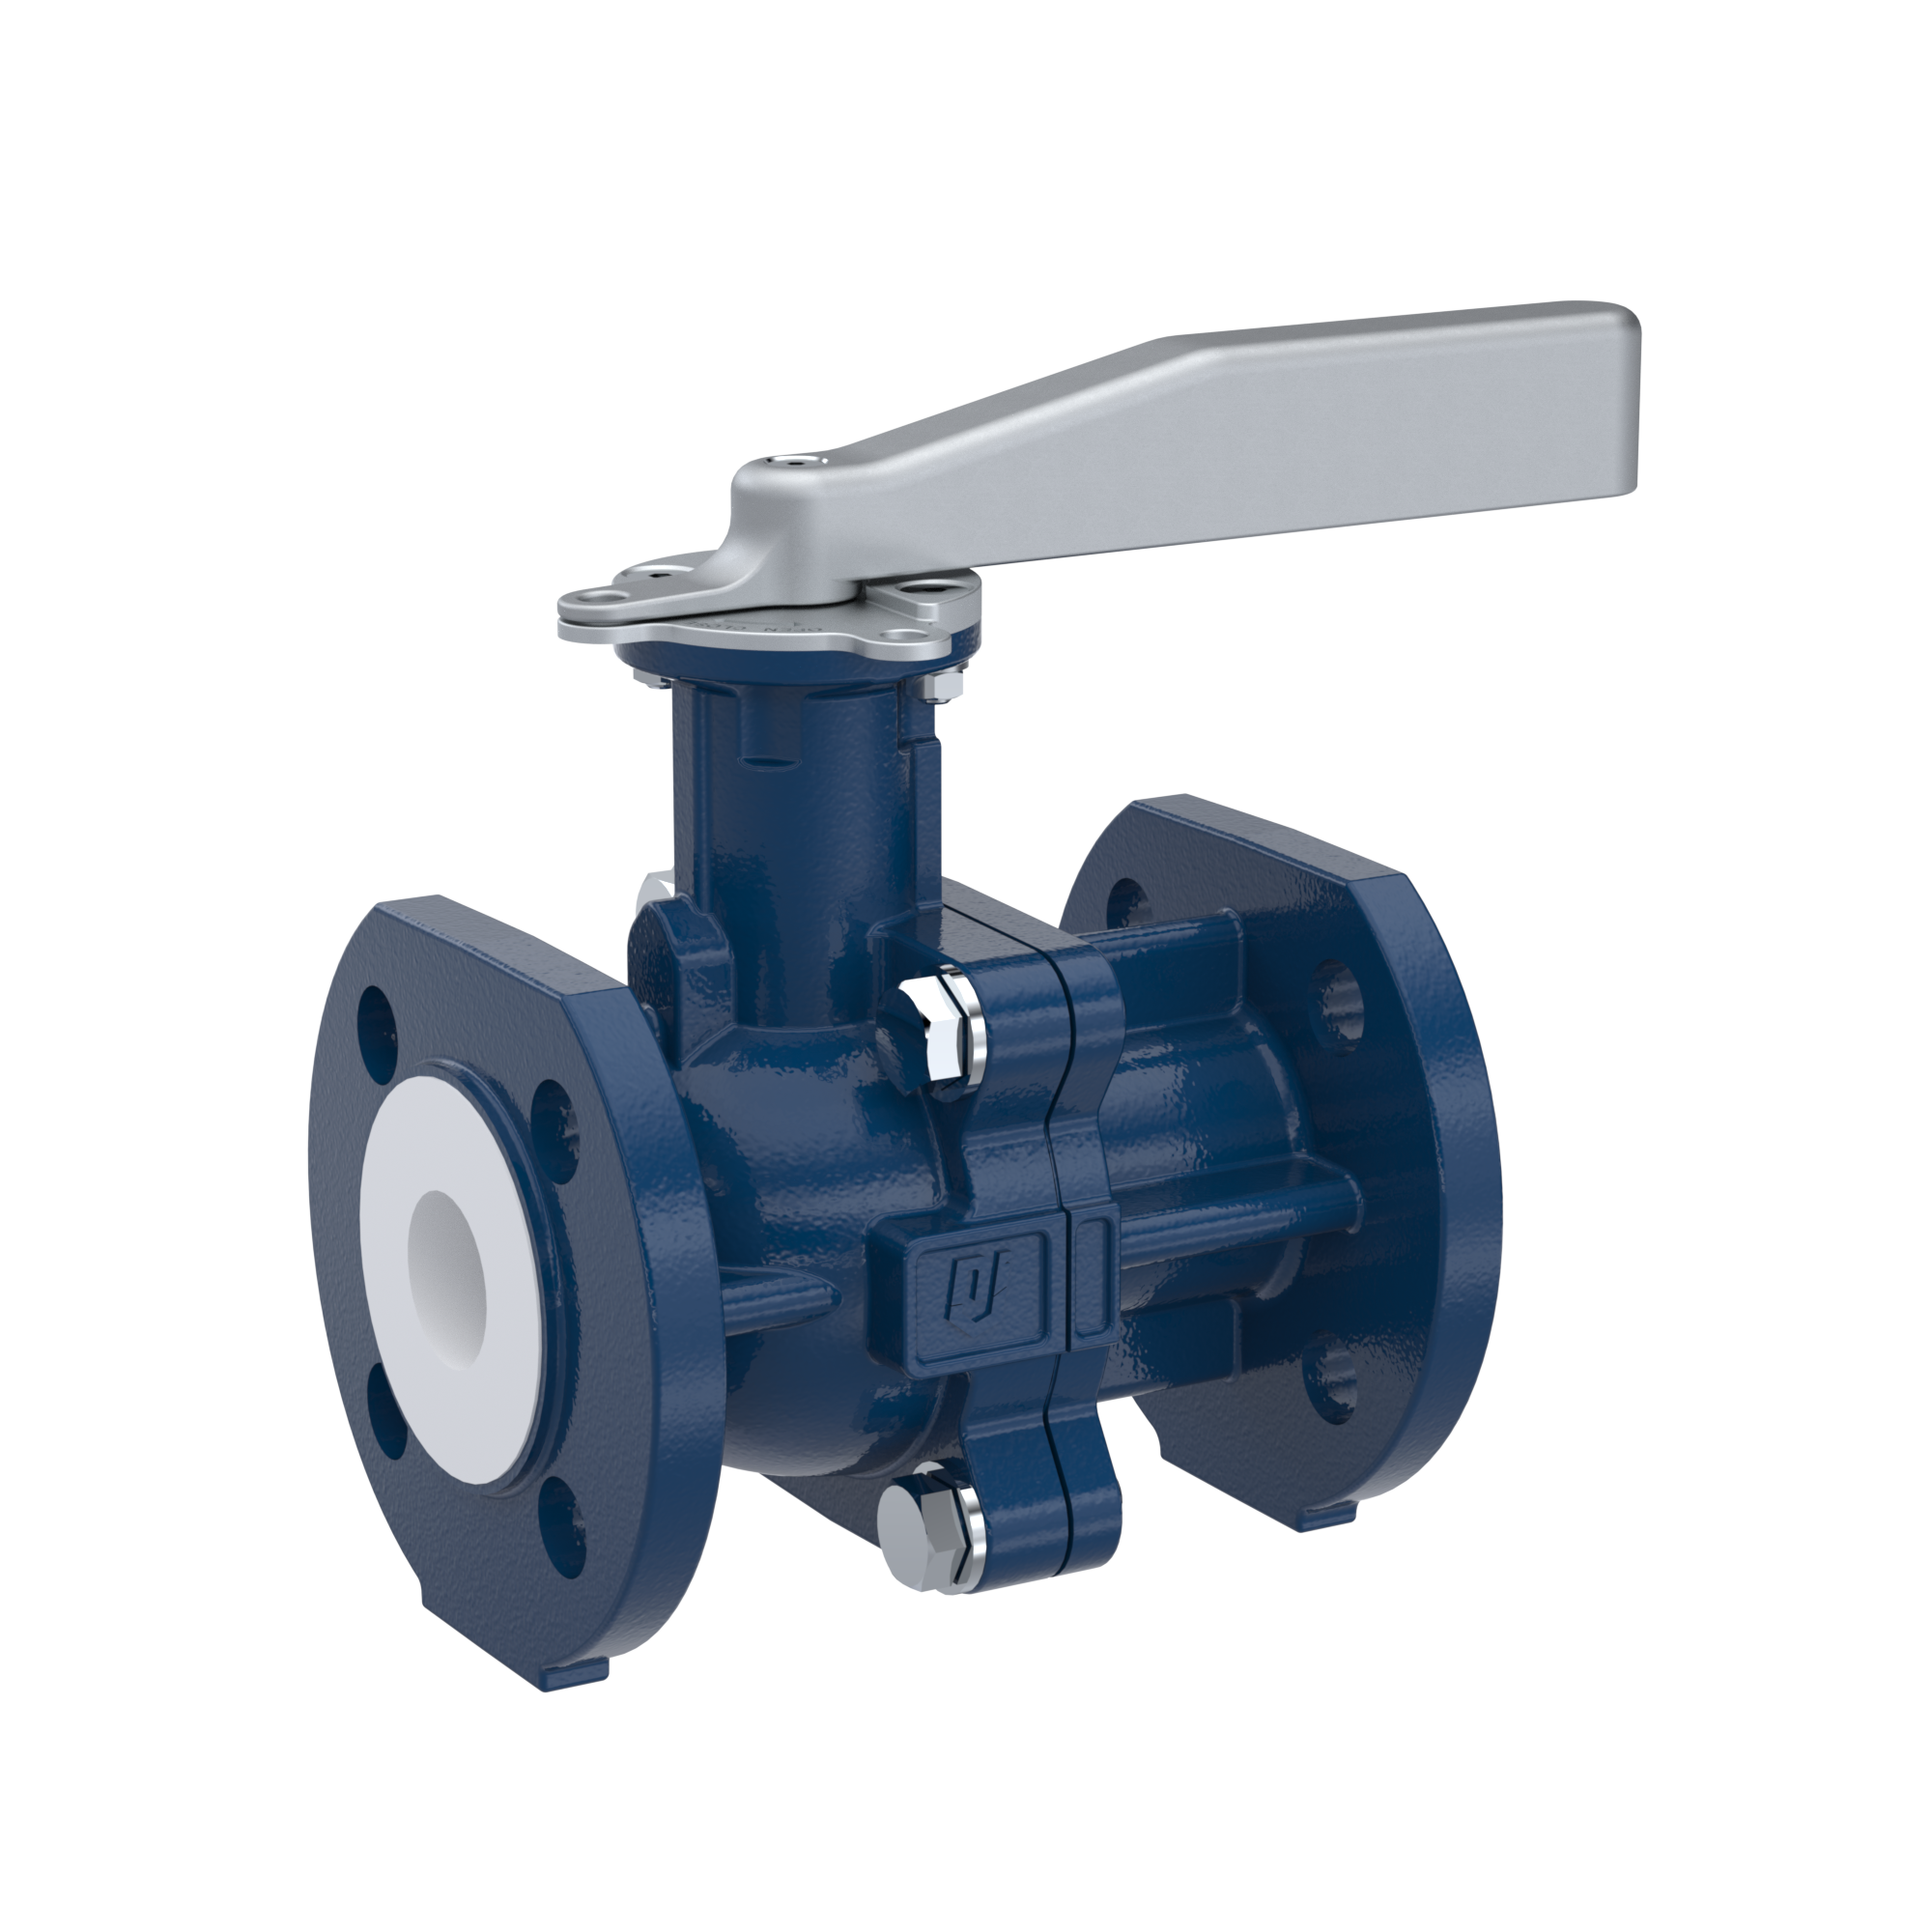 PFA-flange ball valve FK13 DN50 - 2" inch PN10/16 made of spheroidal graphite cast iron with lever hand